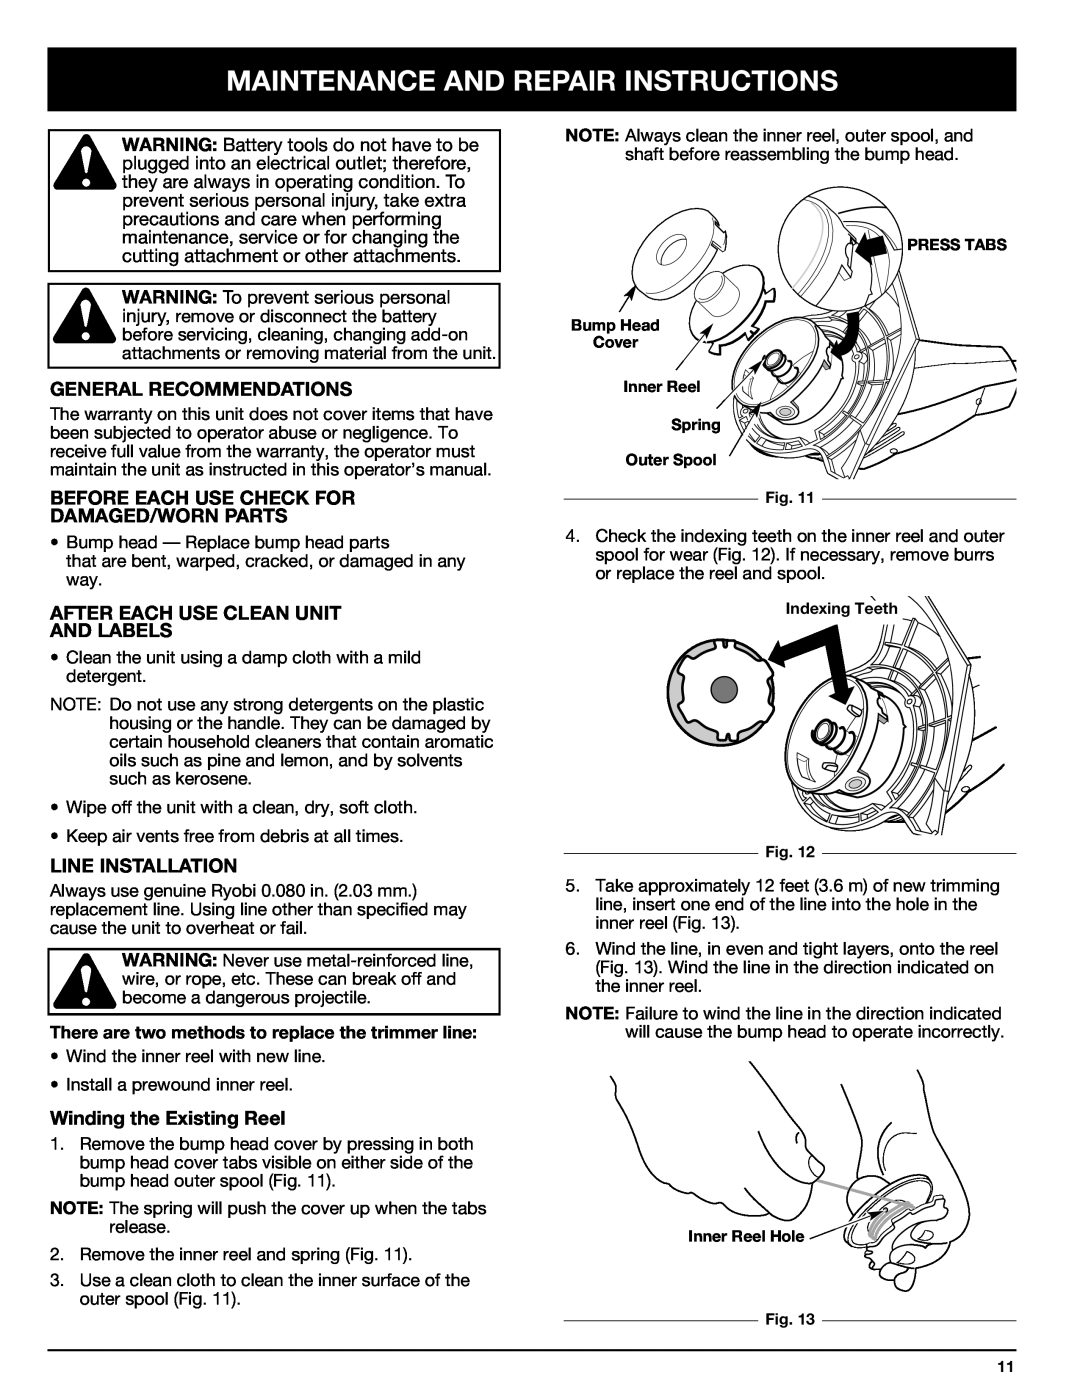 Ryobi 155r Maintenance And Repair Instructions, General Recommendations, Before Each Use Check For Damaged/Worn Parts 